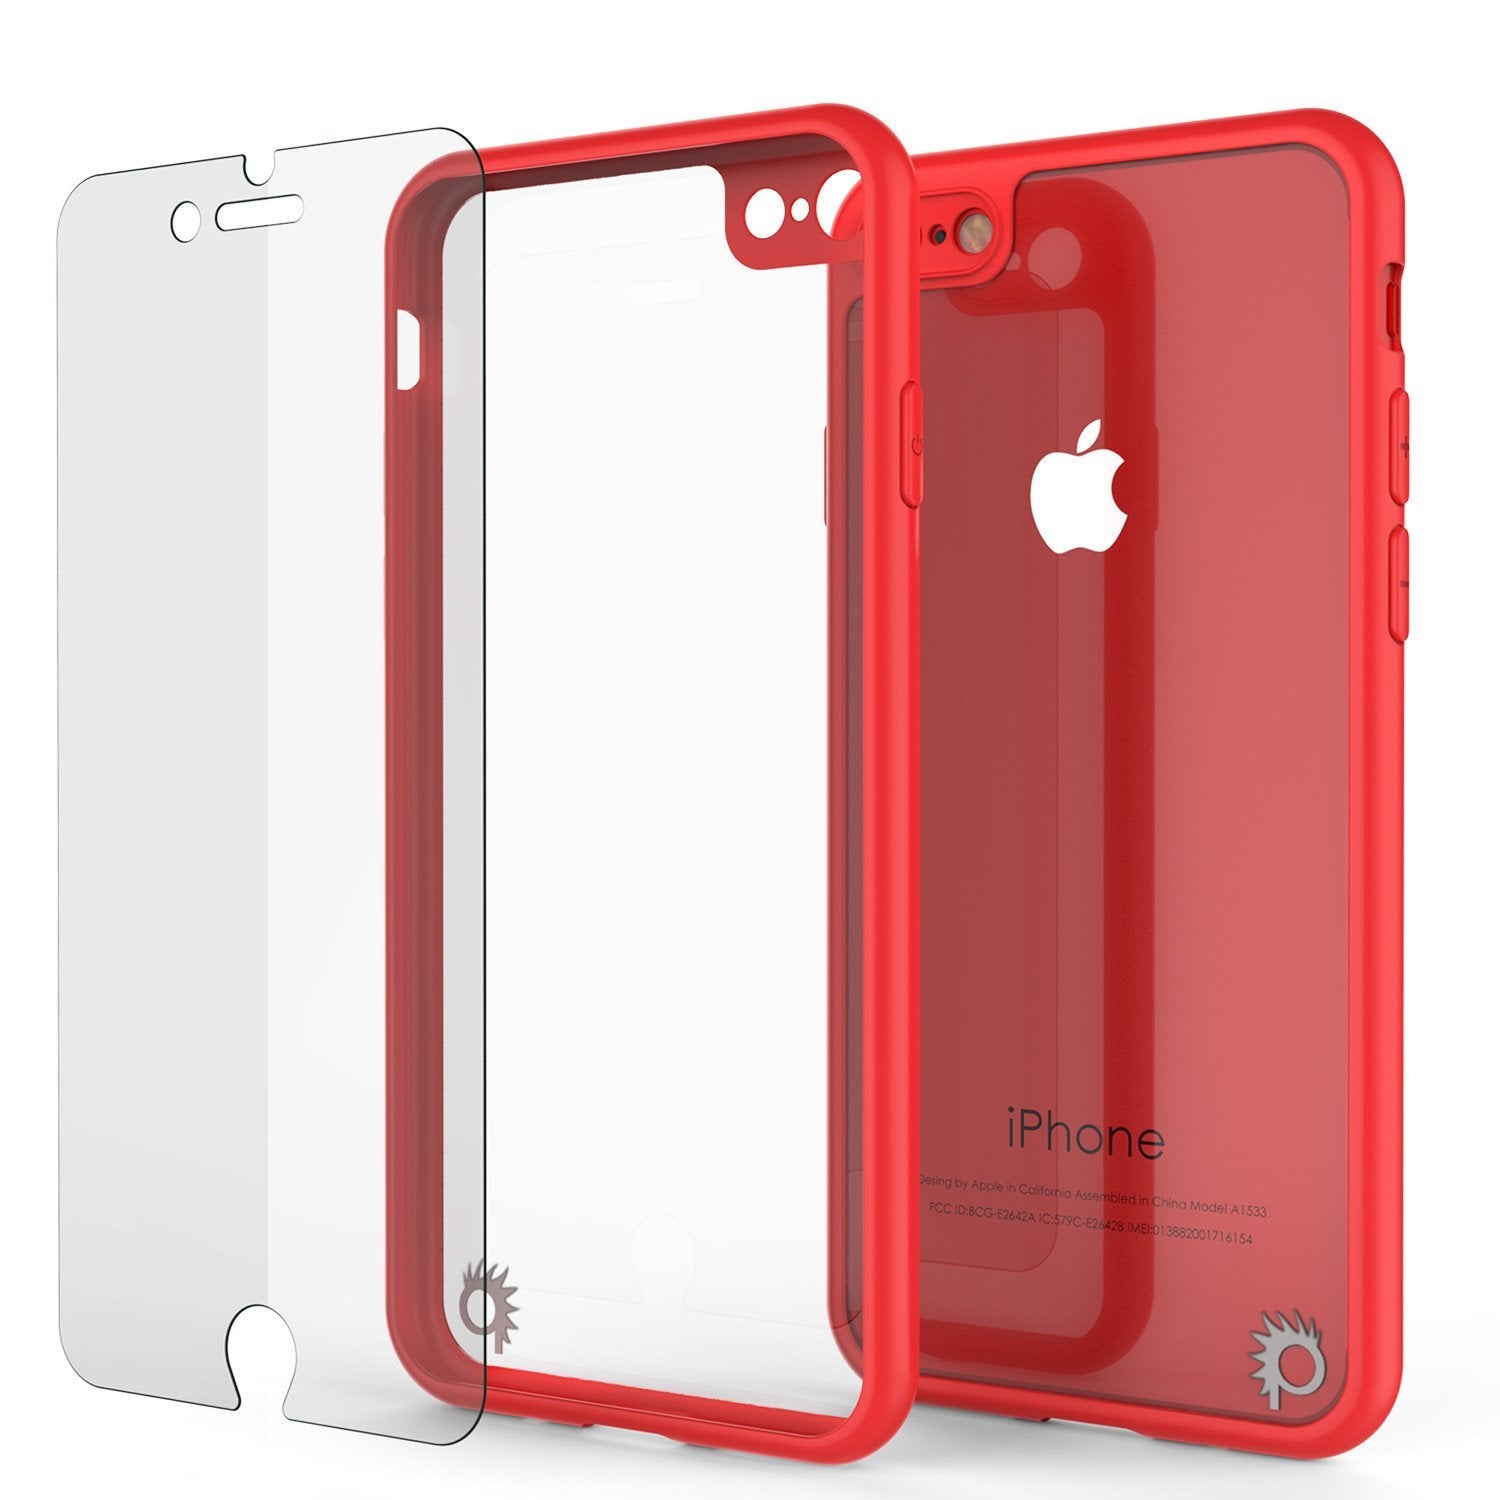 iPhone 8 Case [MASK Series] [RED] Full Body Hybrid Dual Layer TPU Cover W/ protective Tempered Glass Screen Protector - PunkCase NZ